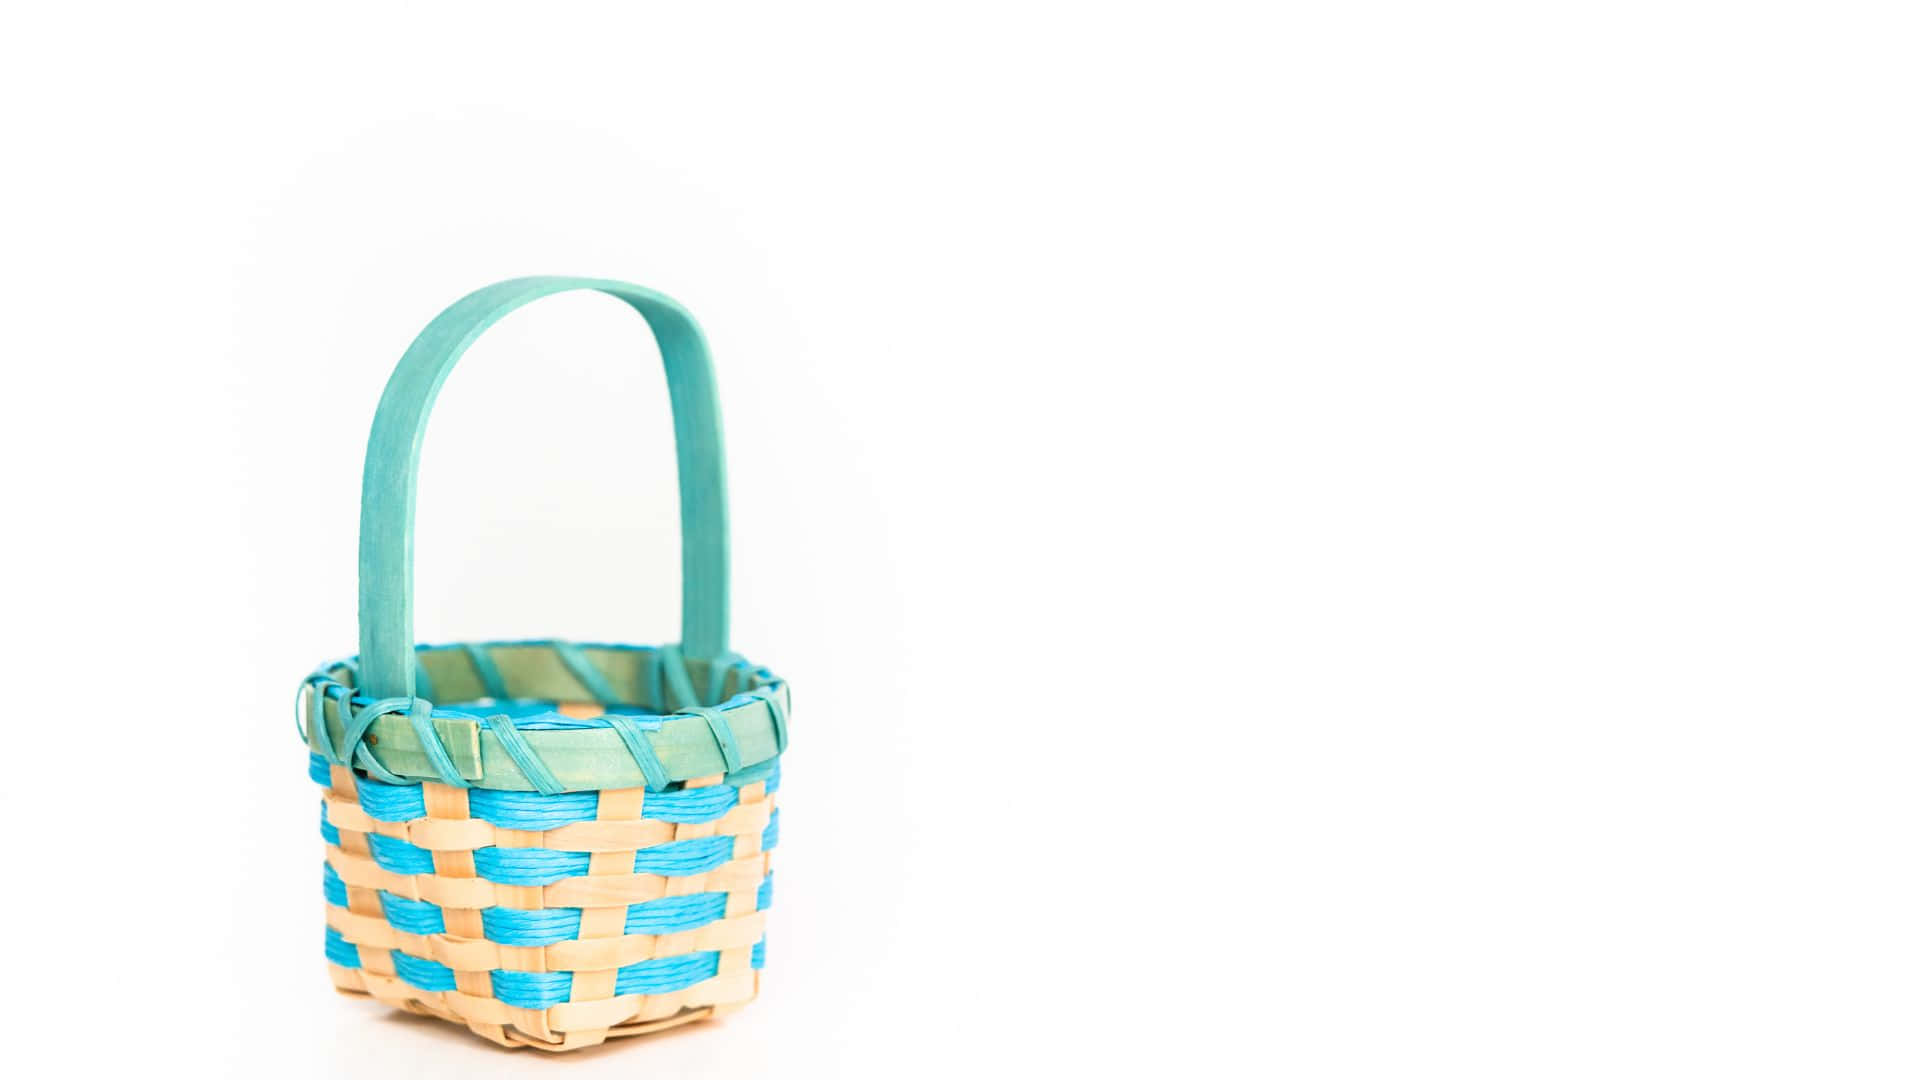 Make your Easter celebration even more special by filling a basket with colorful goodies! Wallpaper